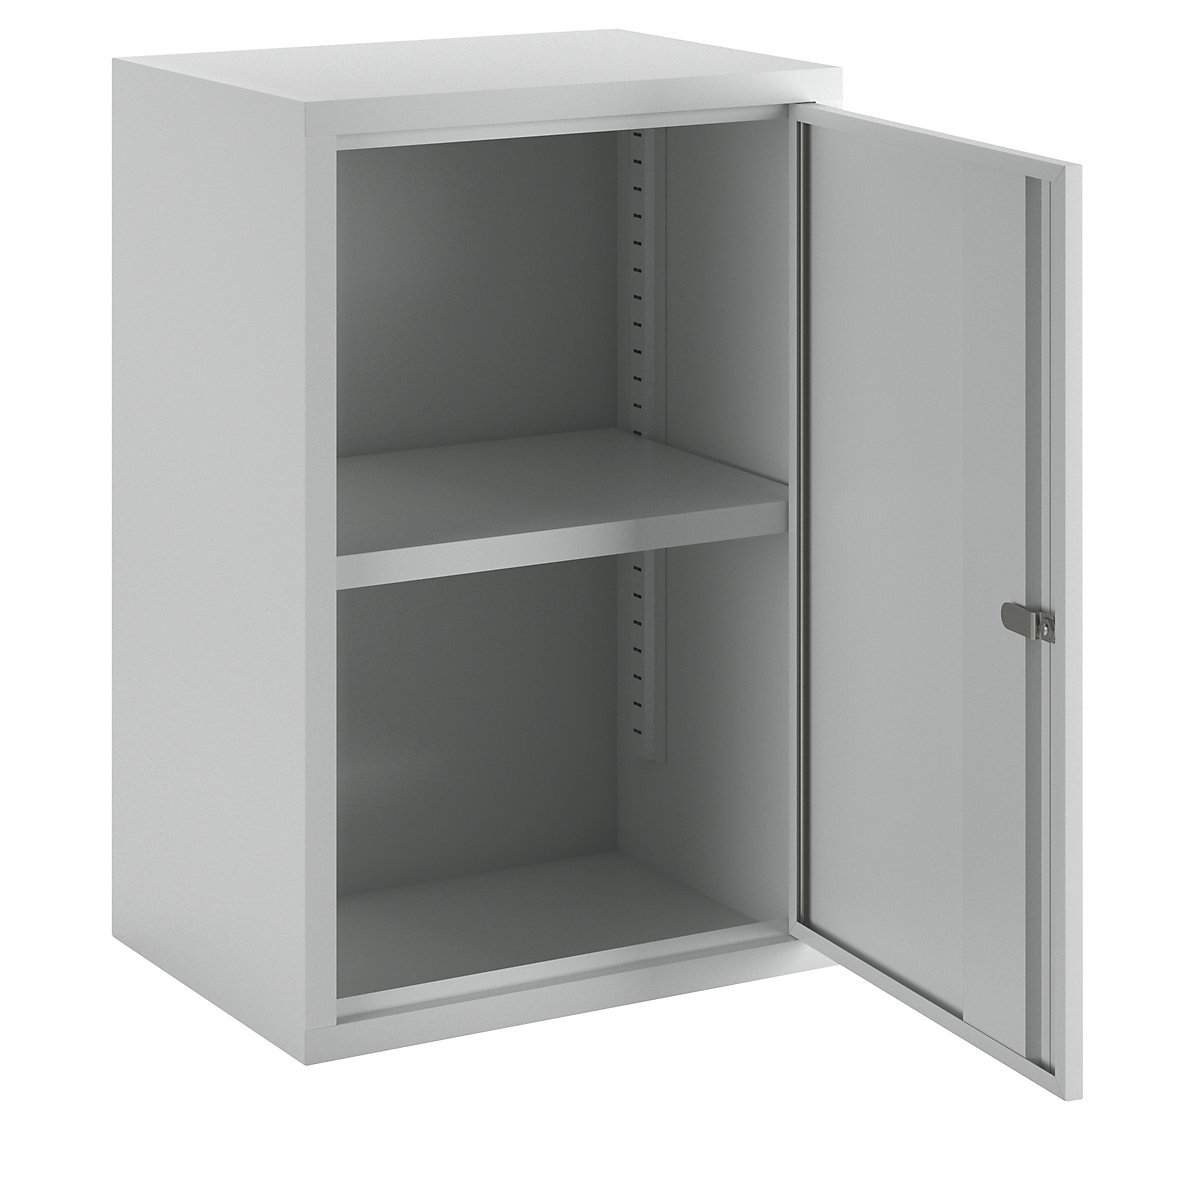 Wall mounted cupboard, height 600 mm – Pavoy, with solid panel door/s, width 400 mm, solid rear panel, grey-7